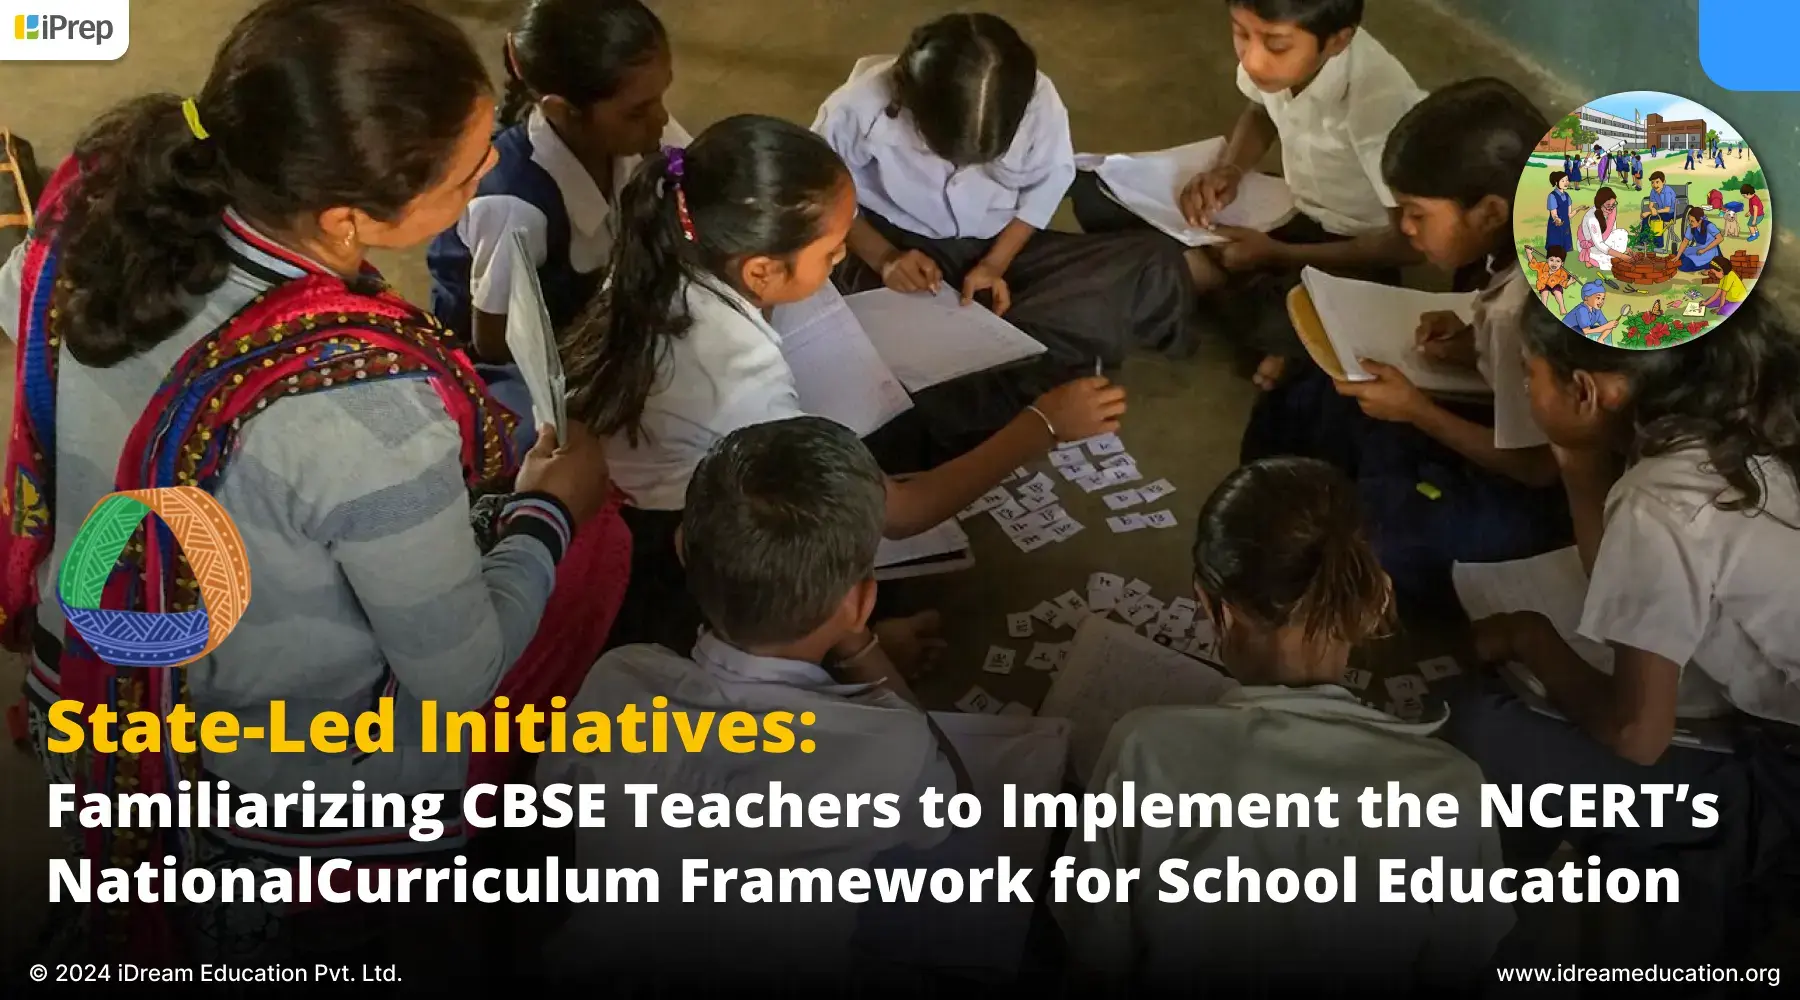 An illustration of a classroom with a teacher teaching and an image highlighting State-Led Initiatives to familiarize CBSE Teachers to Implement the NCERT’s National Curriculum Framework for School Education